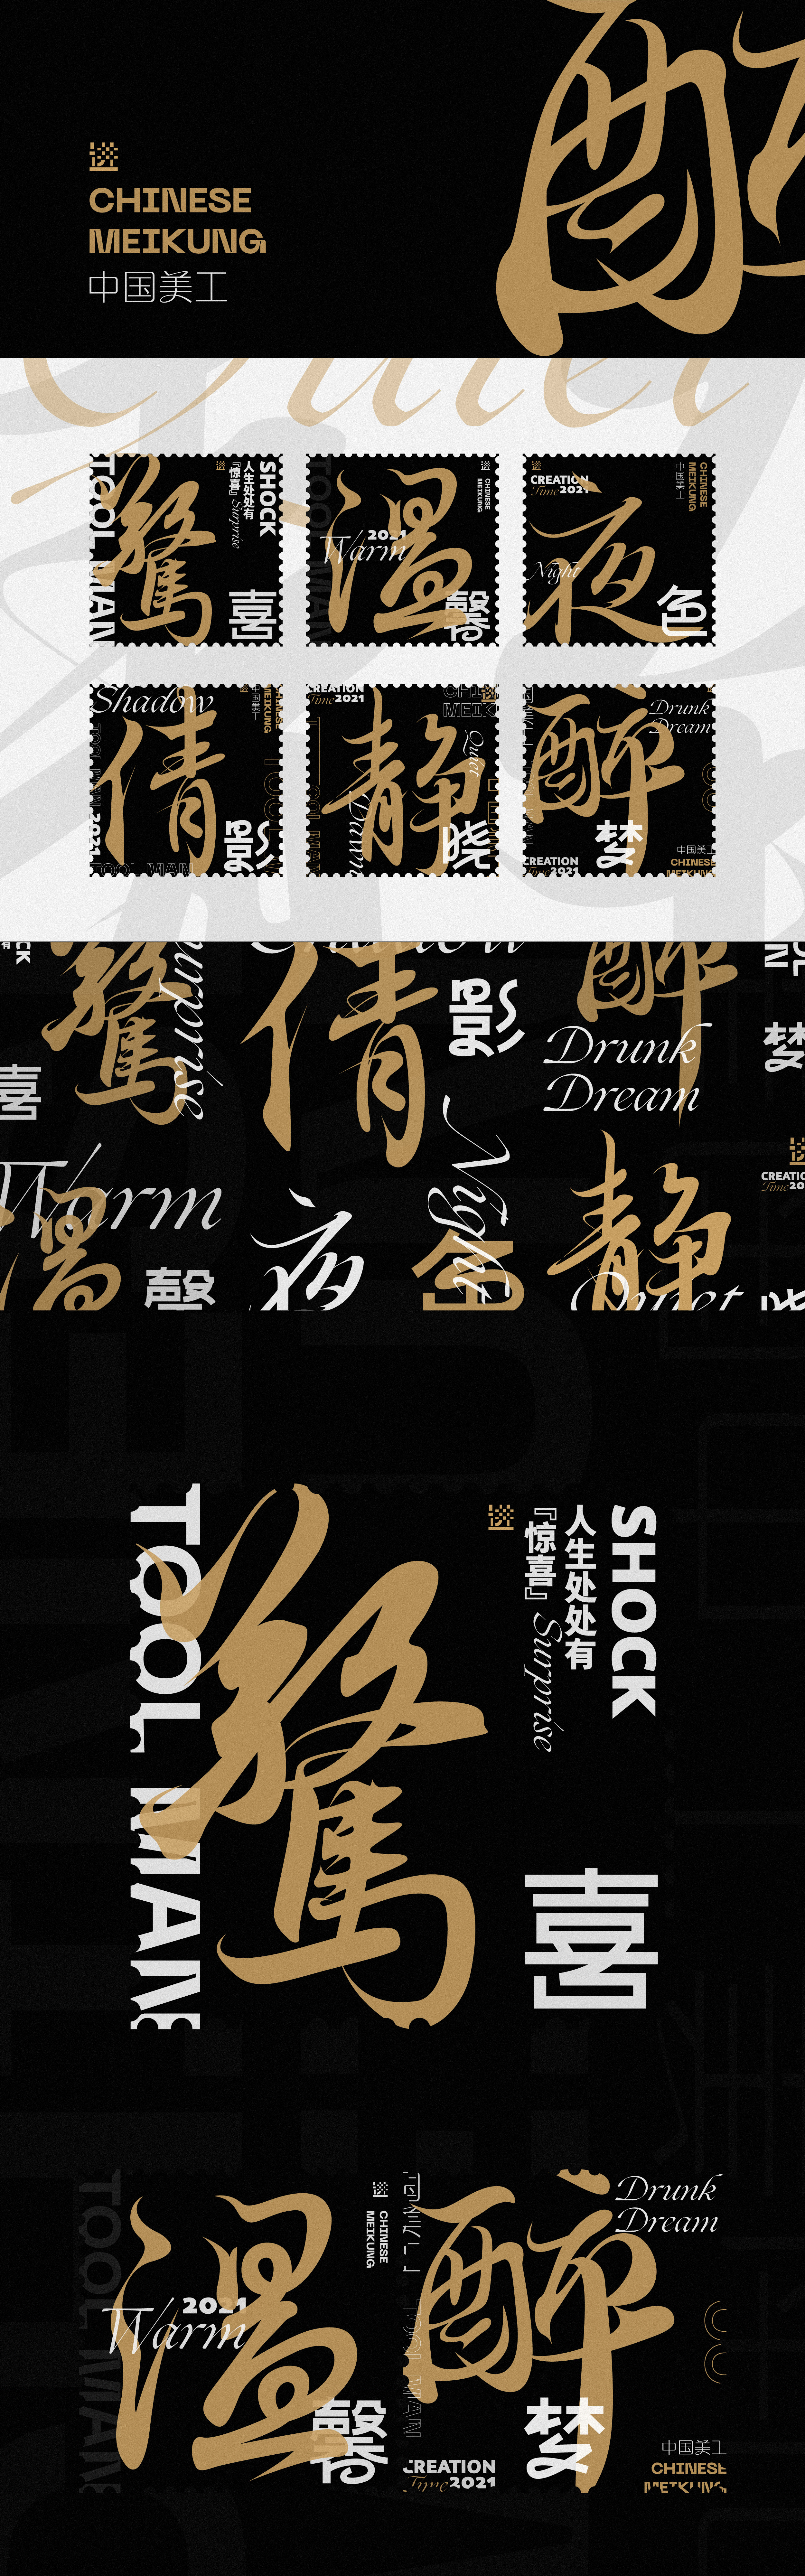 5P Collection of the latest Chinese font design schemes in 2021 #.28